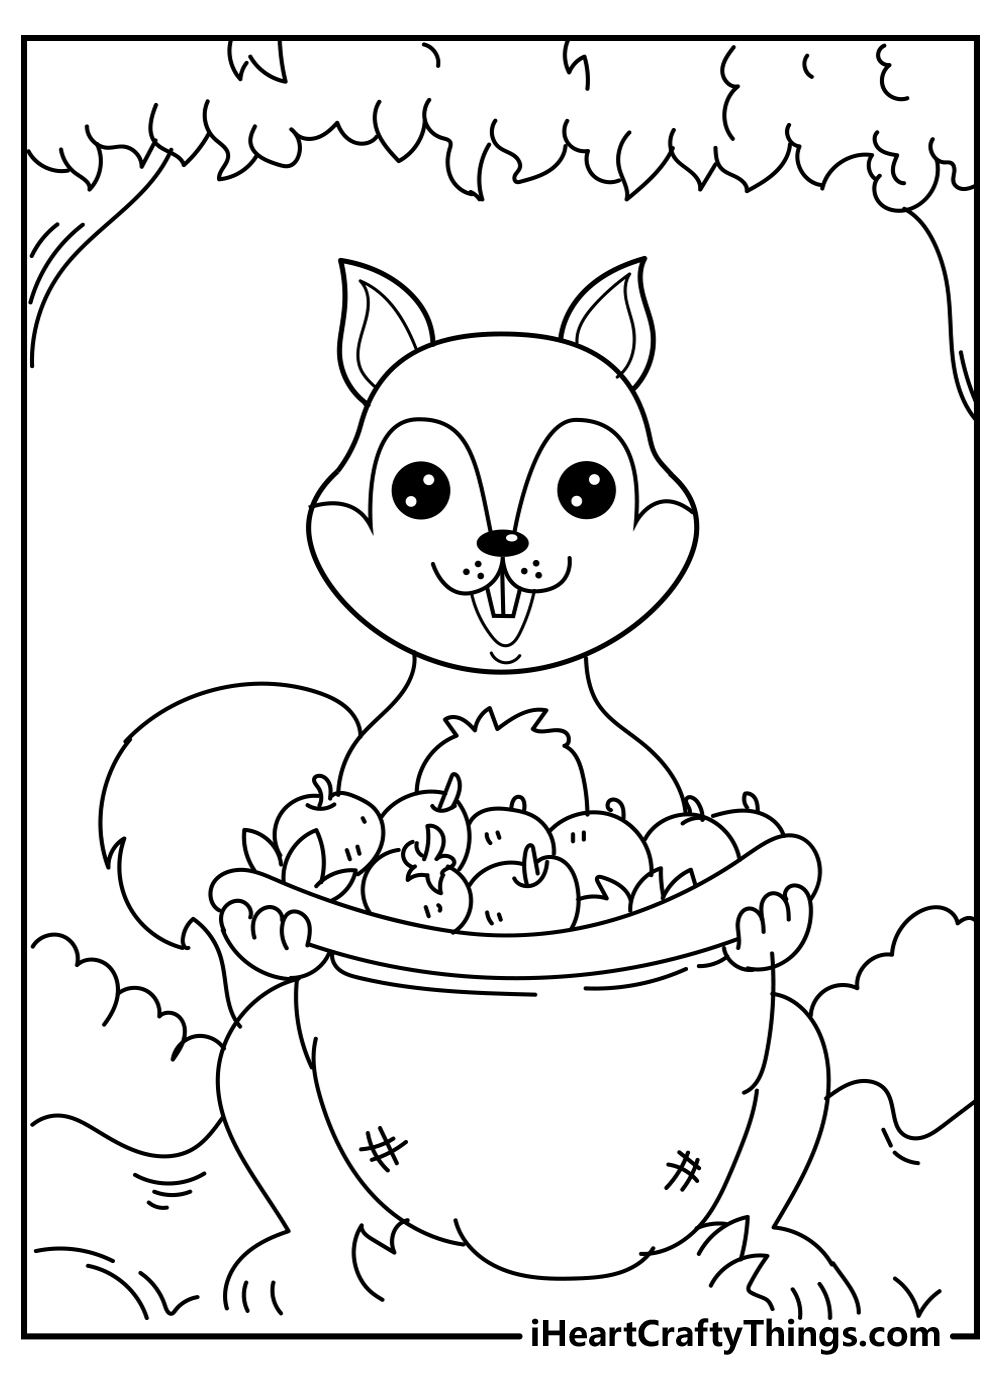 cute squirrel coloring sheet for adults